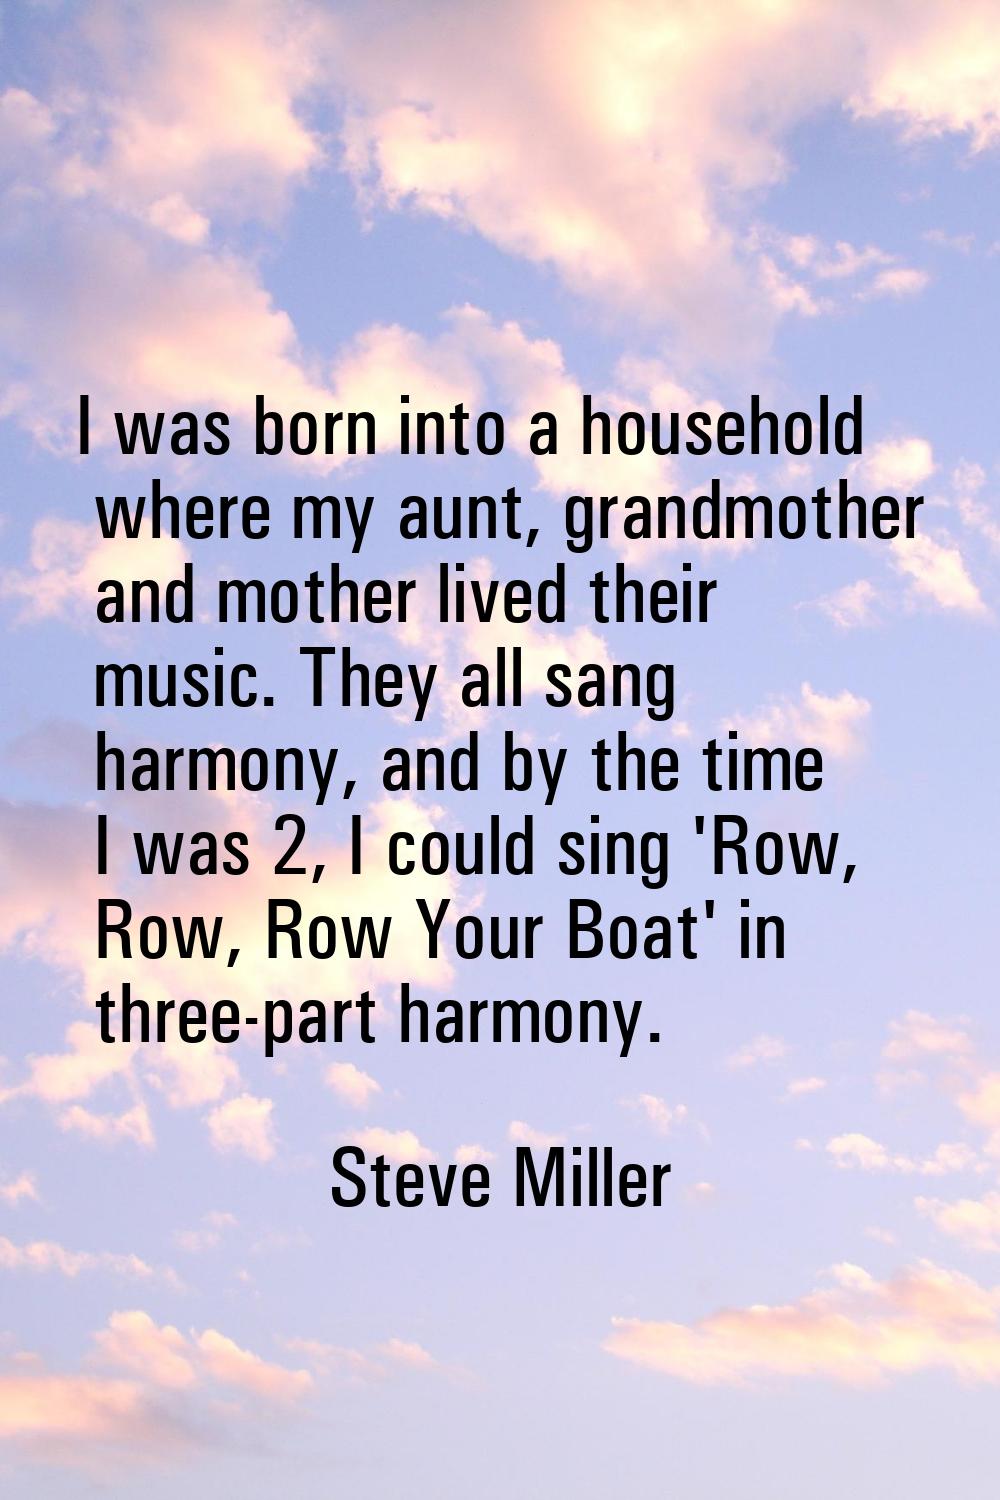 I was born into a household where my aunt, grandmother and mother lived their music. They all sang 